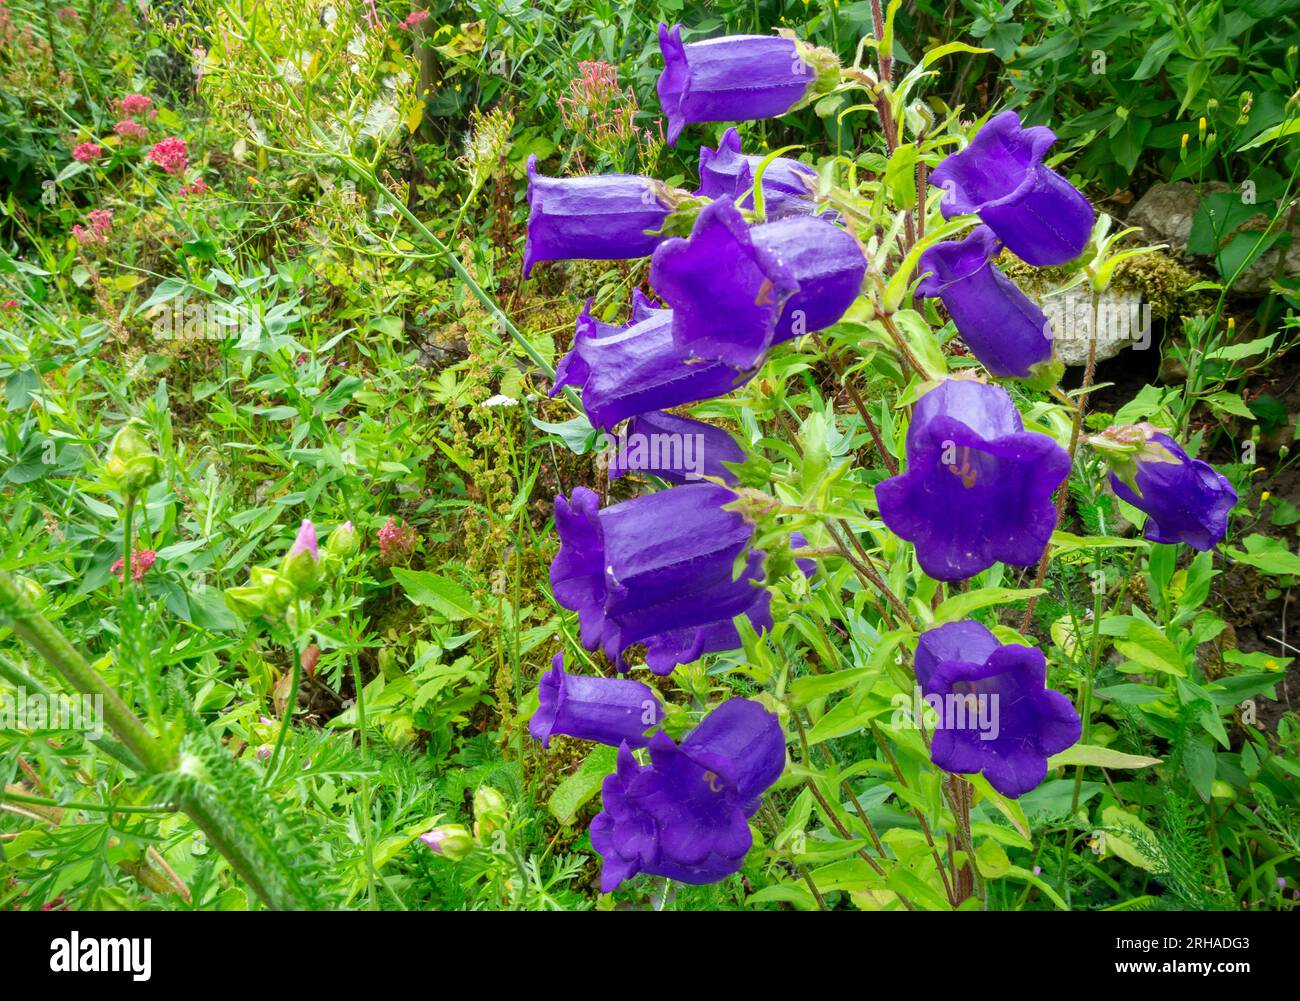 Close up view of purple Campanula or bellflower part of the Campanulaceae family of flowering plants seen in a cottage garden in summer. Stock Photo